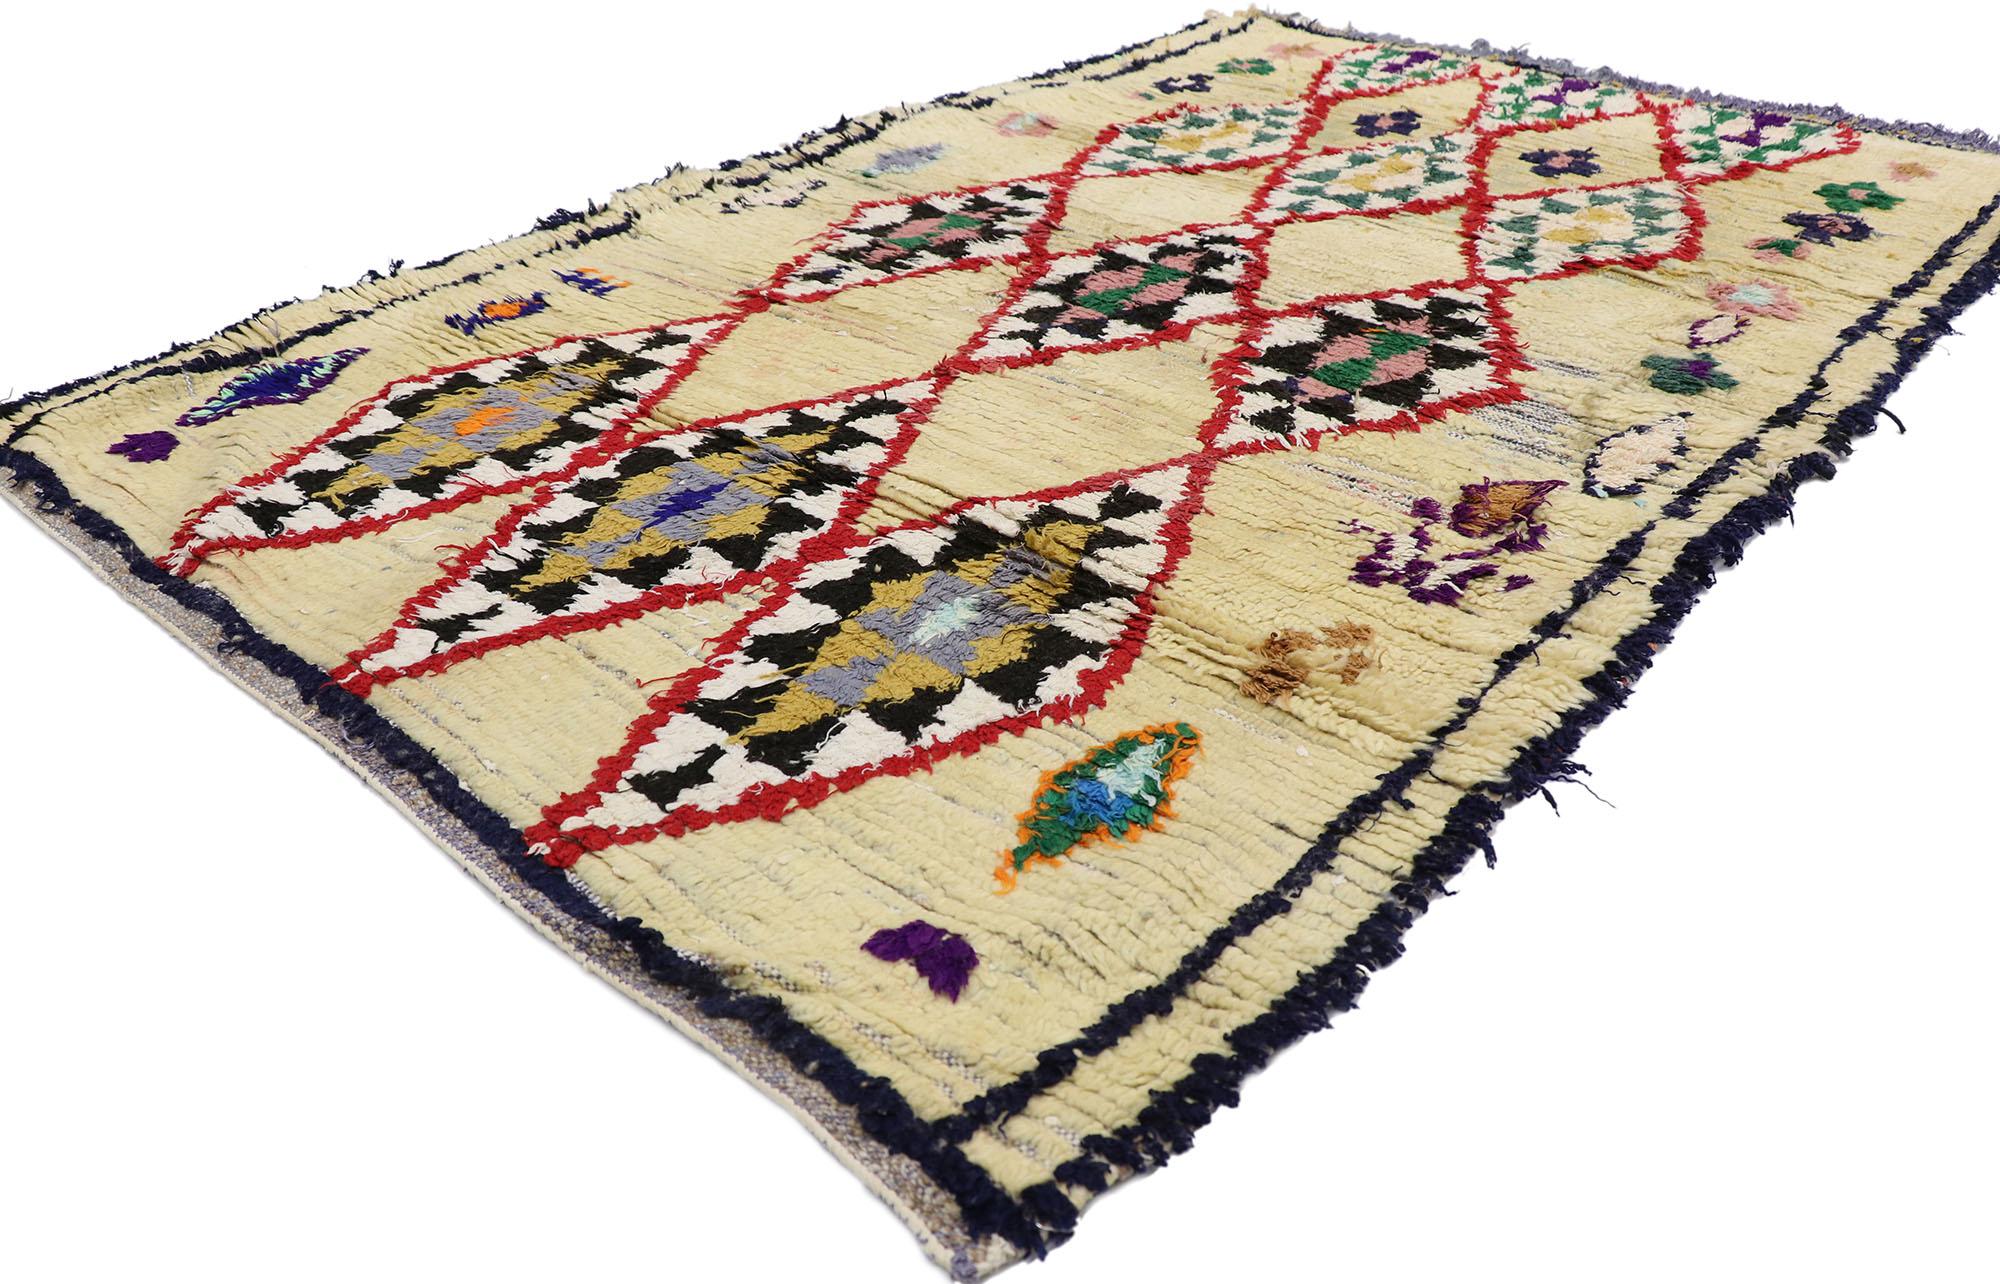 21587 Vintage Berber Moroccan Azilal rug with Tribal style 03'11 x 06'04. Showcasing a bold expressive design, incredible detail and texture, this hand knotted cotton and wool vintage Berber Moroccan Azilal rug is a captivating vision of woven